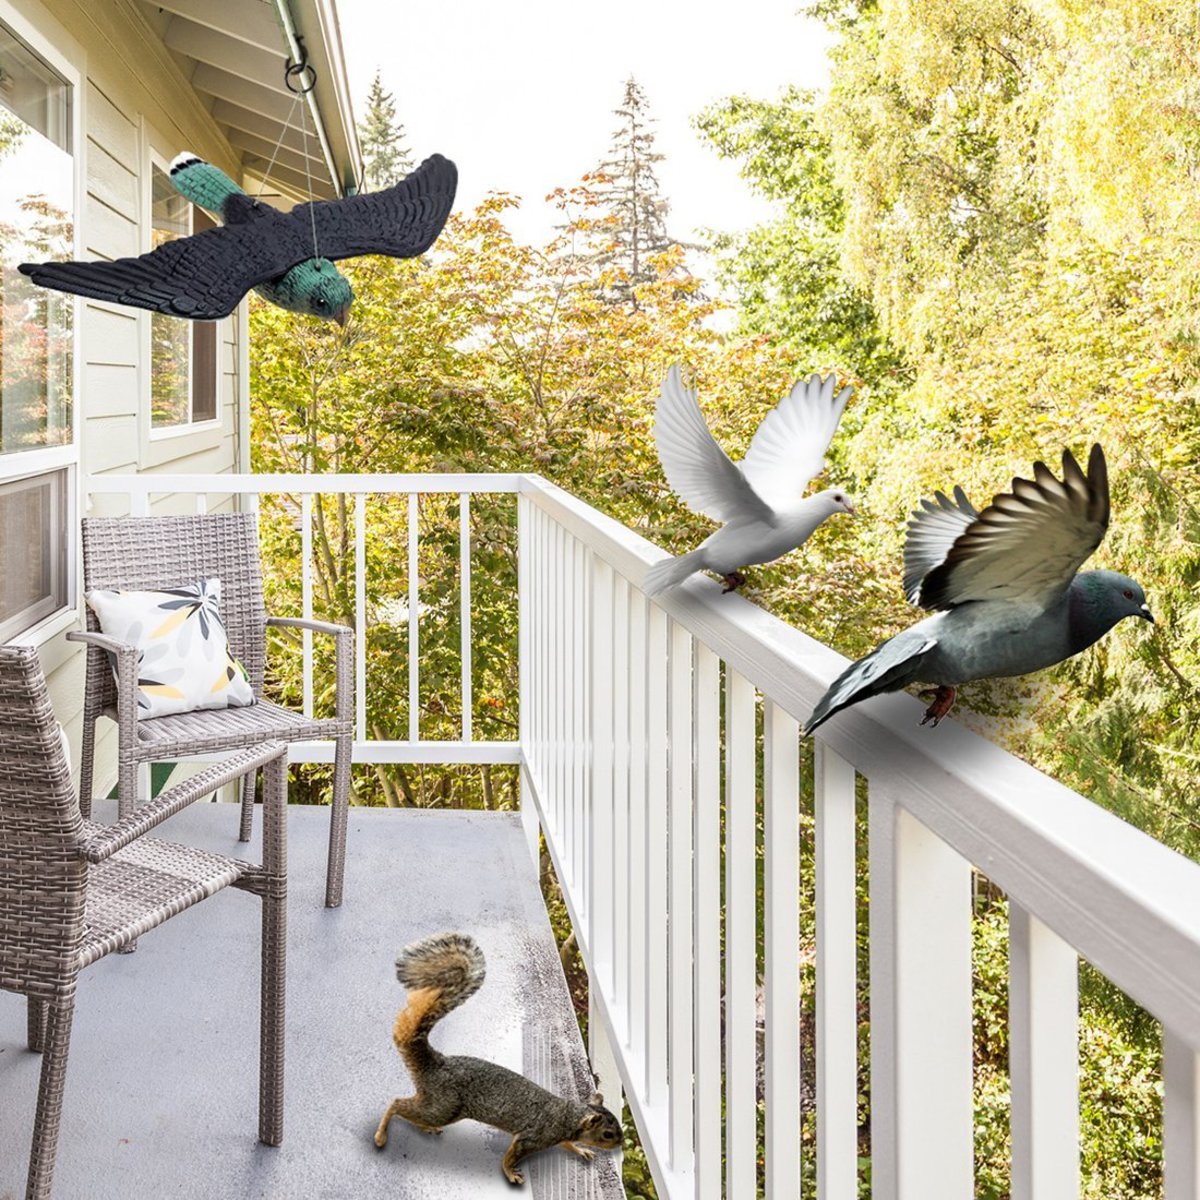 How To Keep Birds From Pooping On Your Patio Furniture Furniture Walls